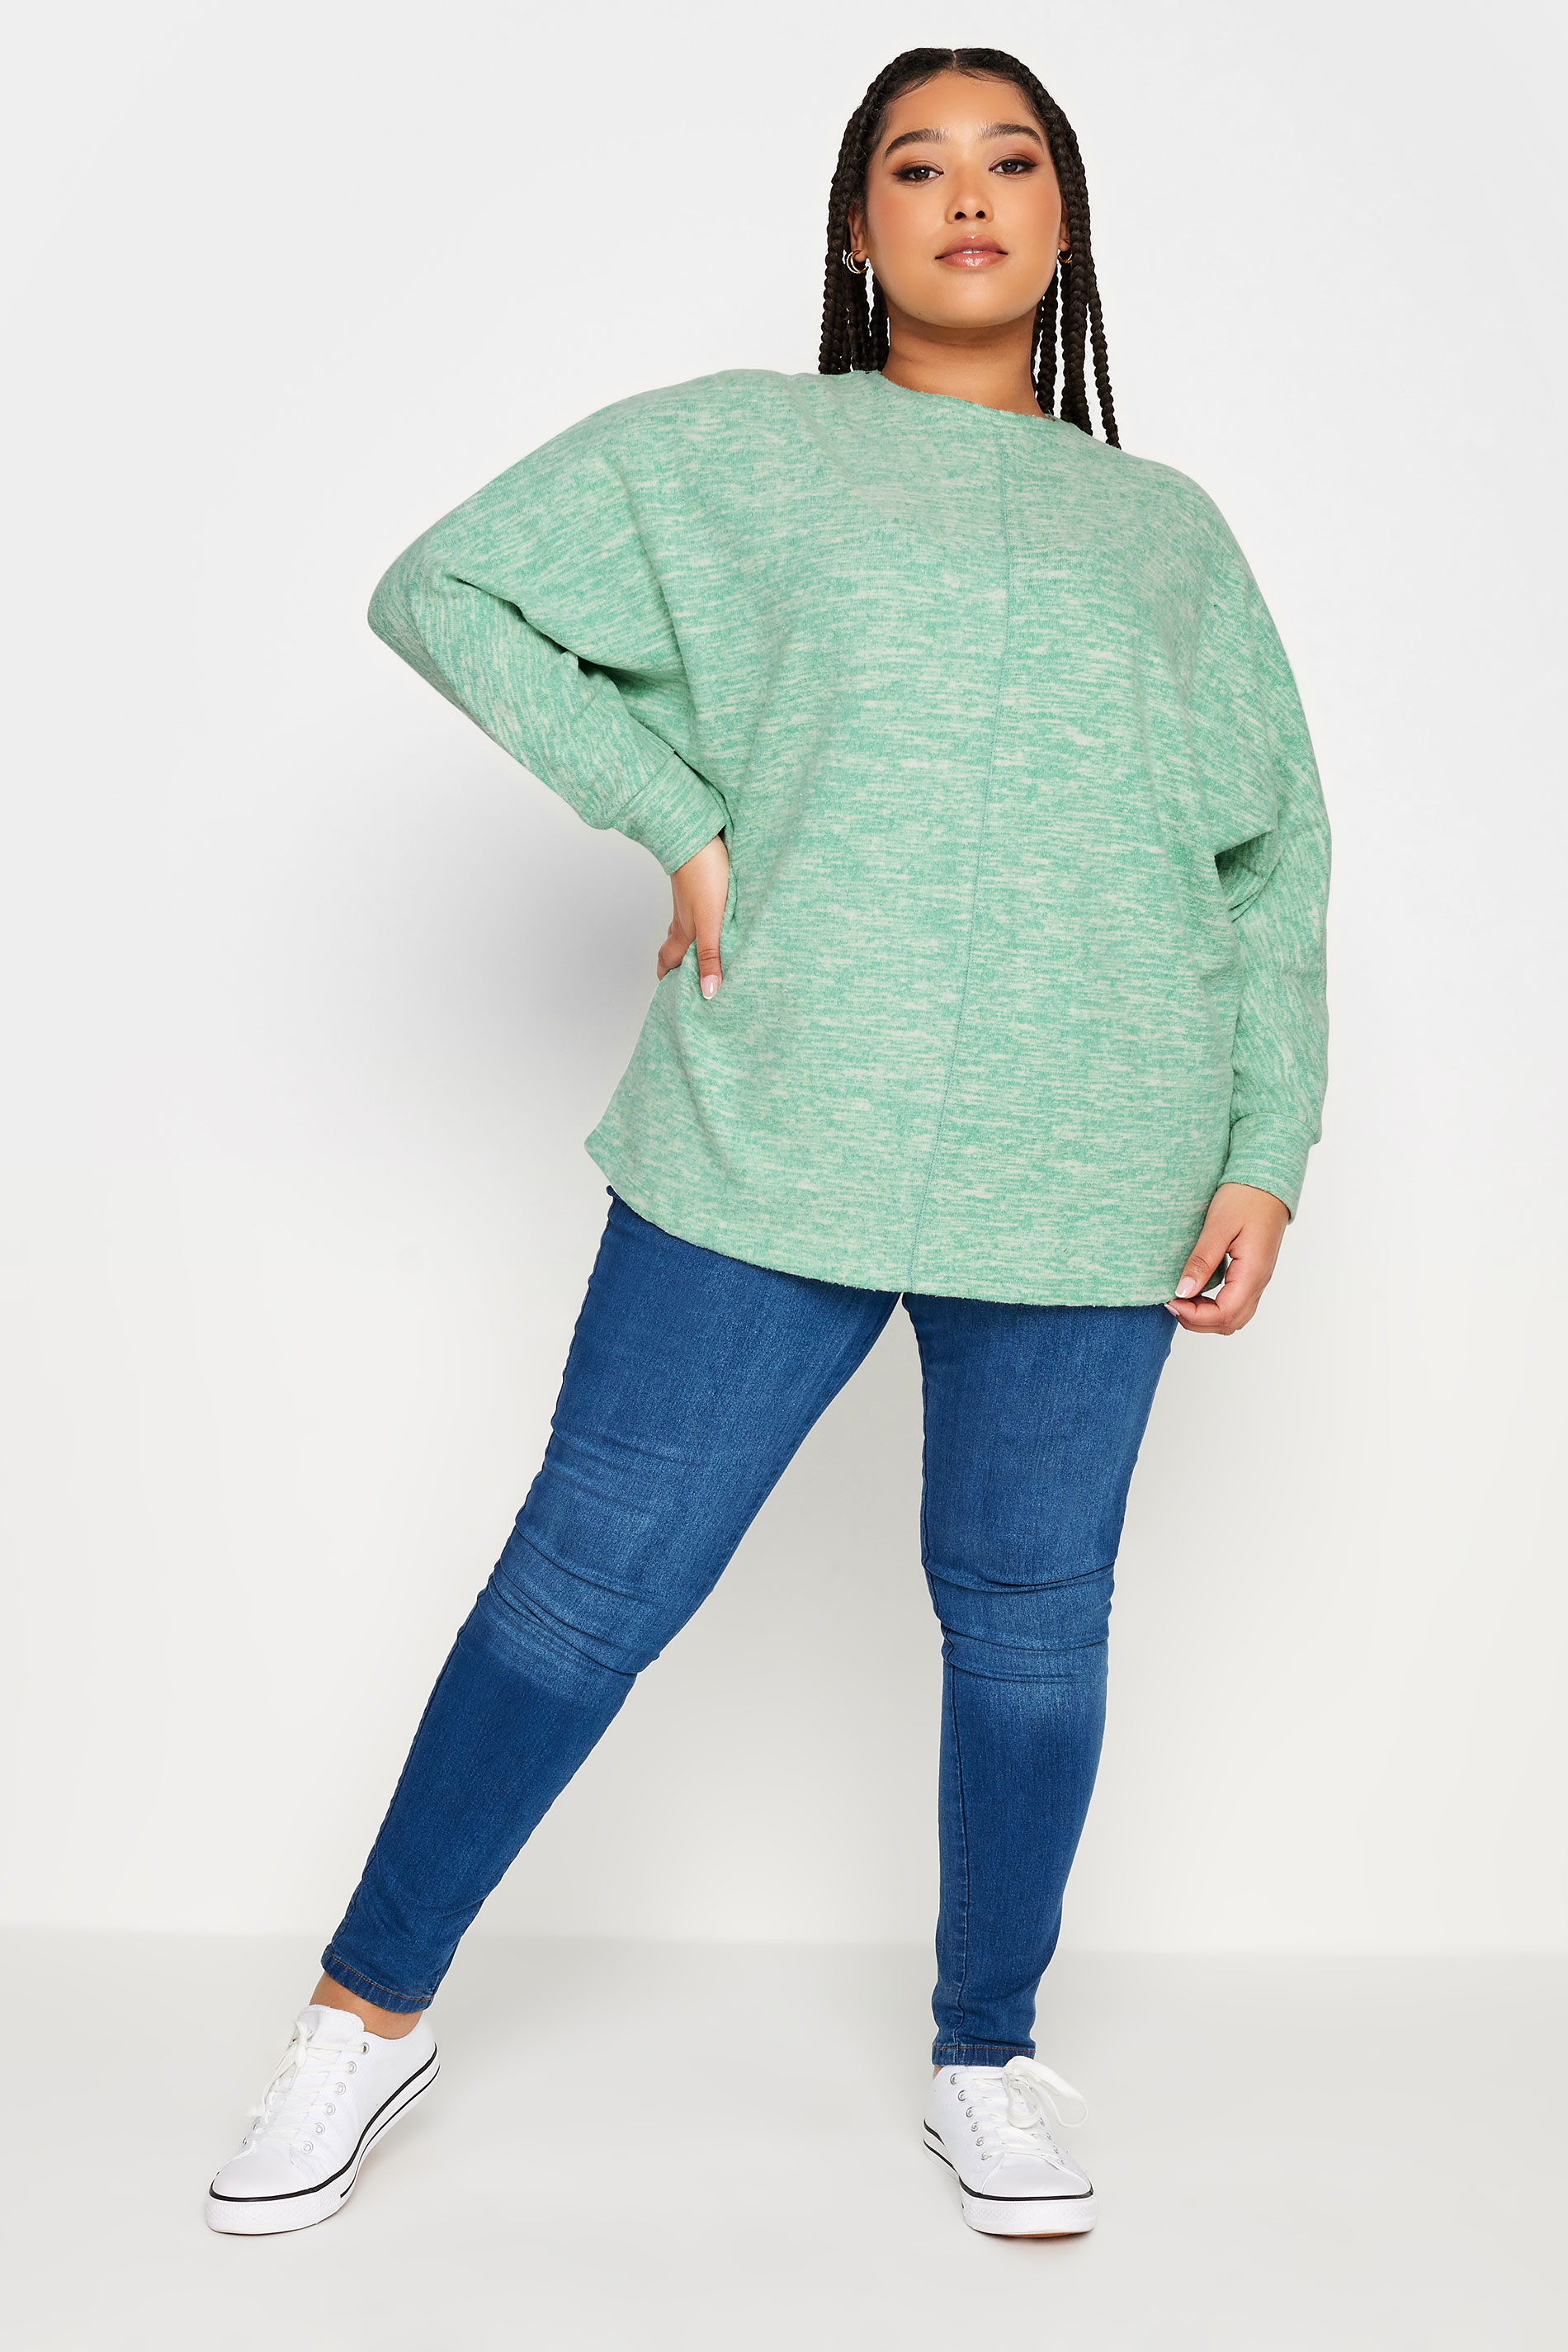 YOURS LUXURY Plus Size Green Marl Soft Touch Sweatshirt | Yours Clothing 2